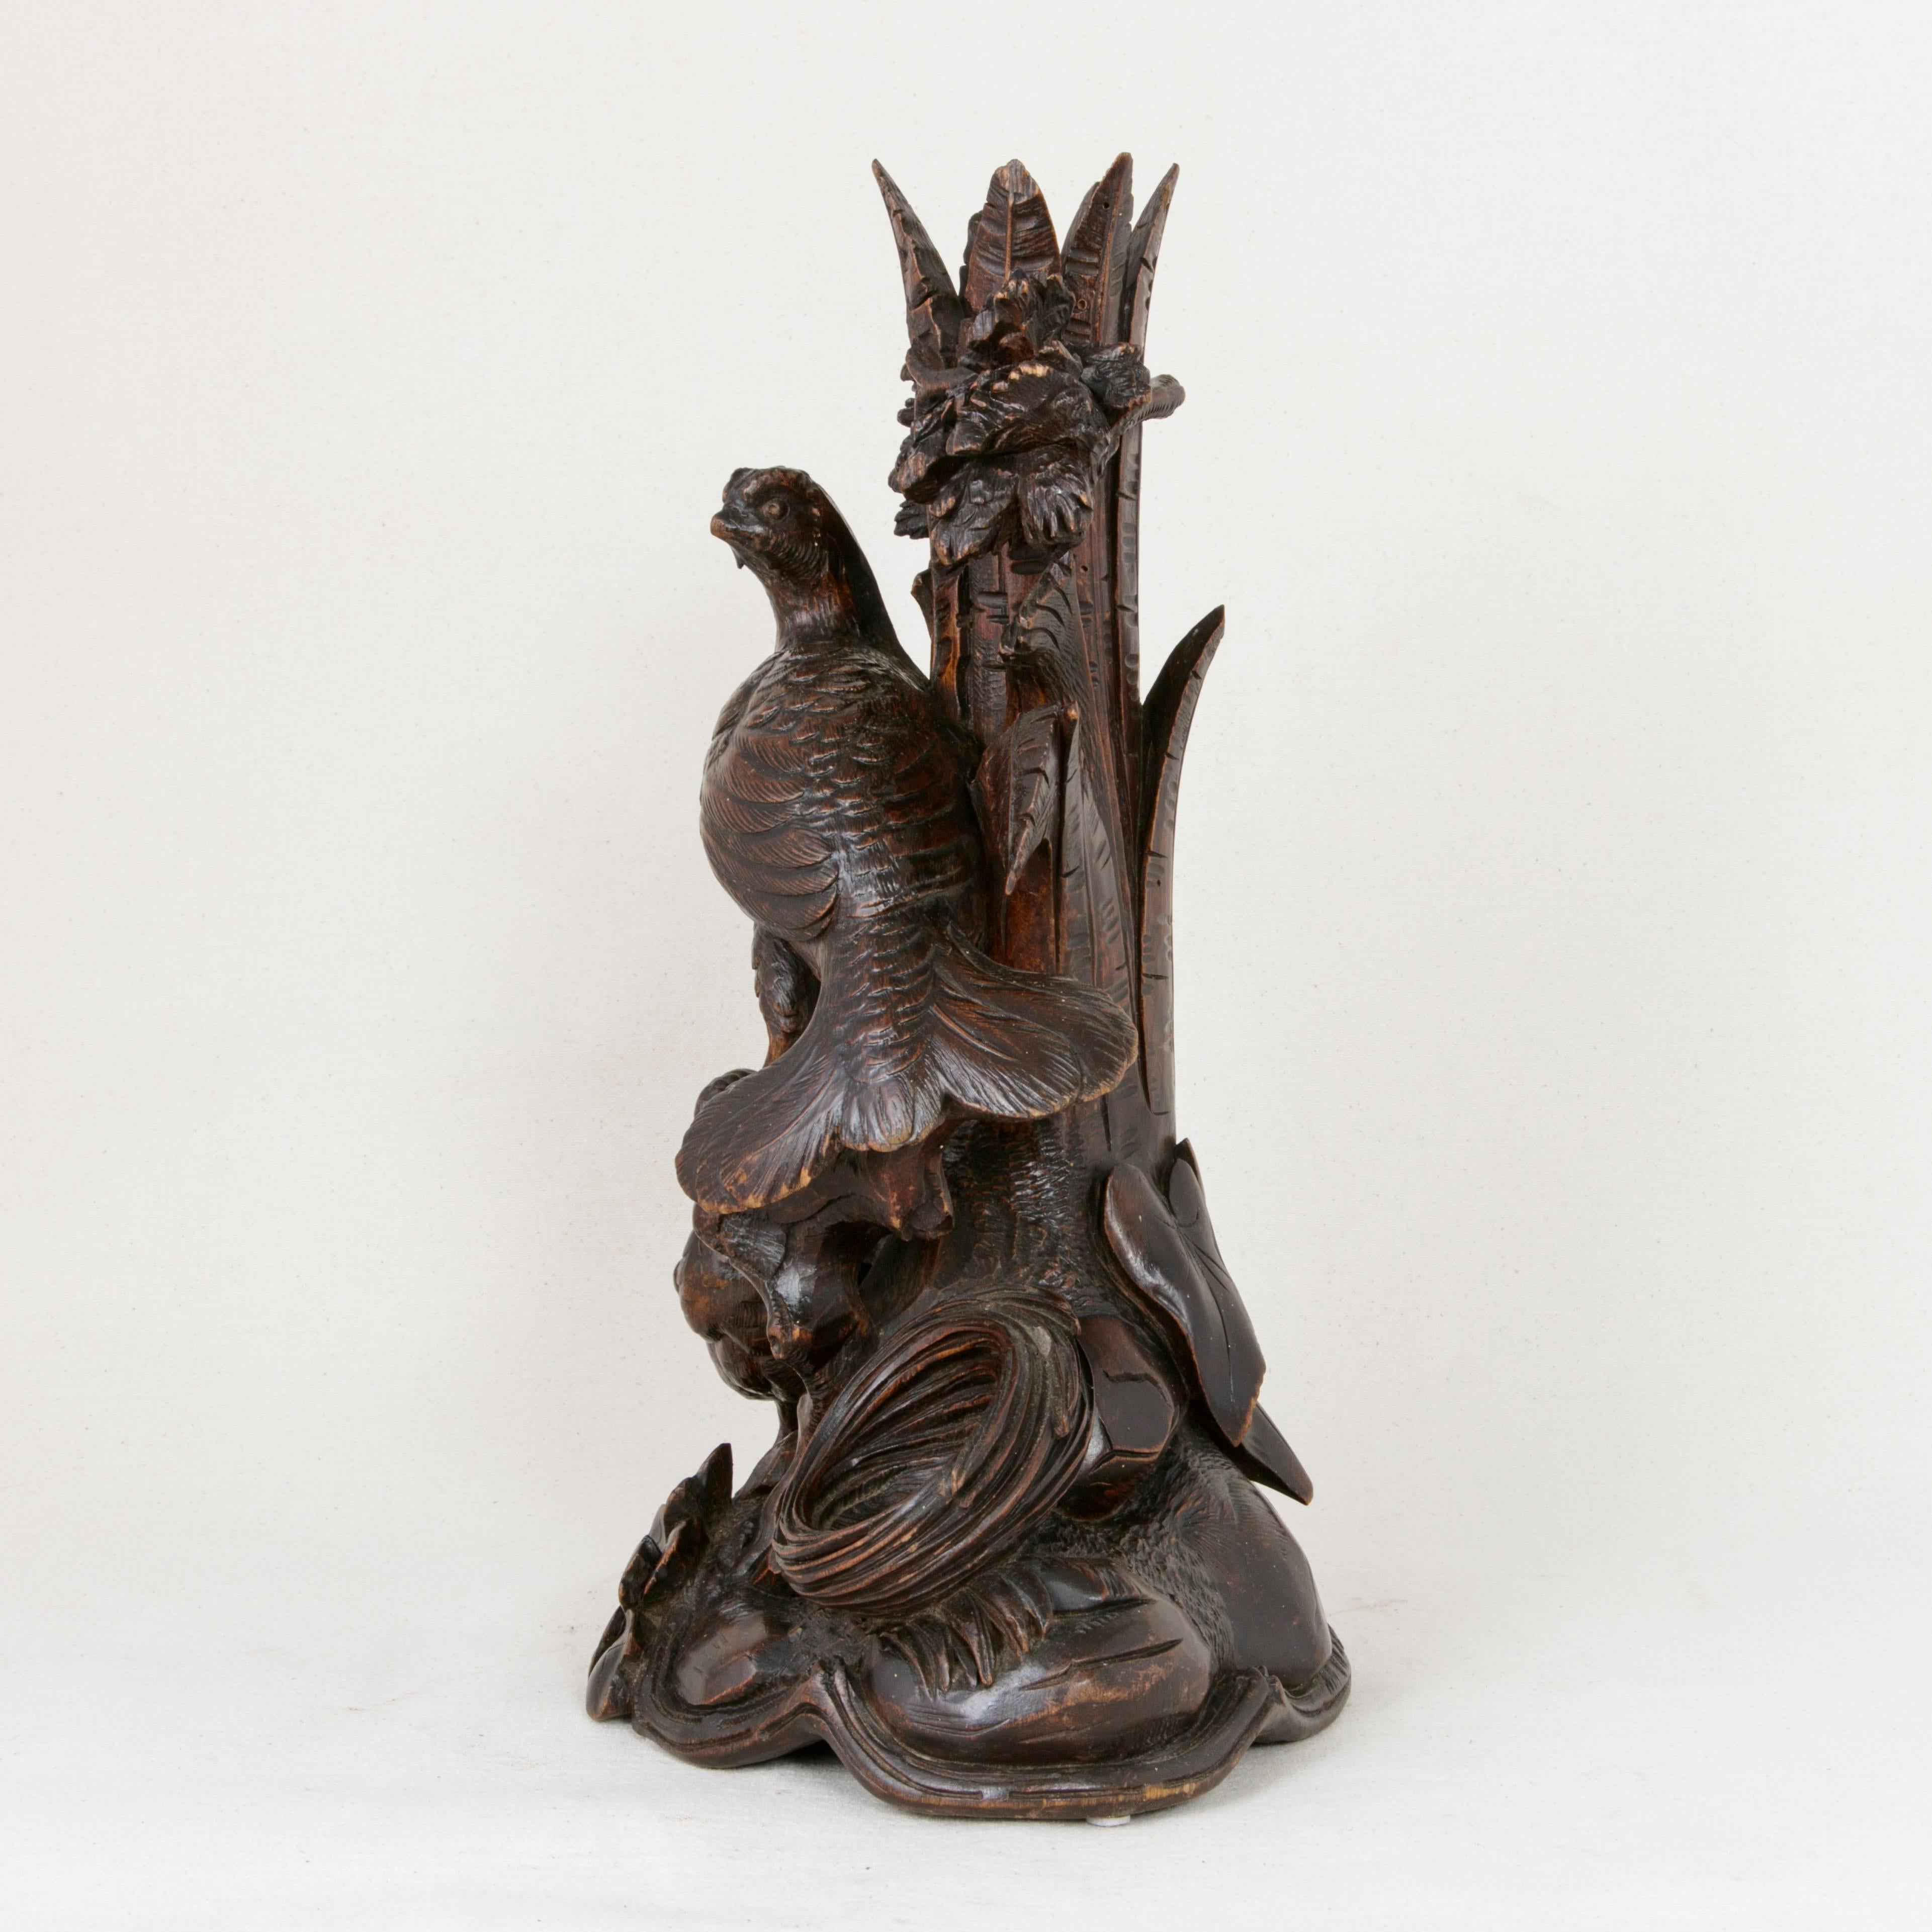 Early 20th Century French Hand-Carved Black Forest Vase or Candlestick with Game Birds, circa 1900